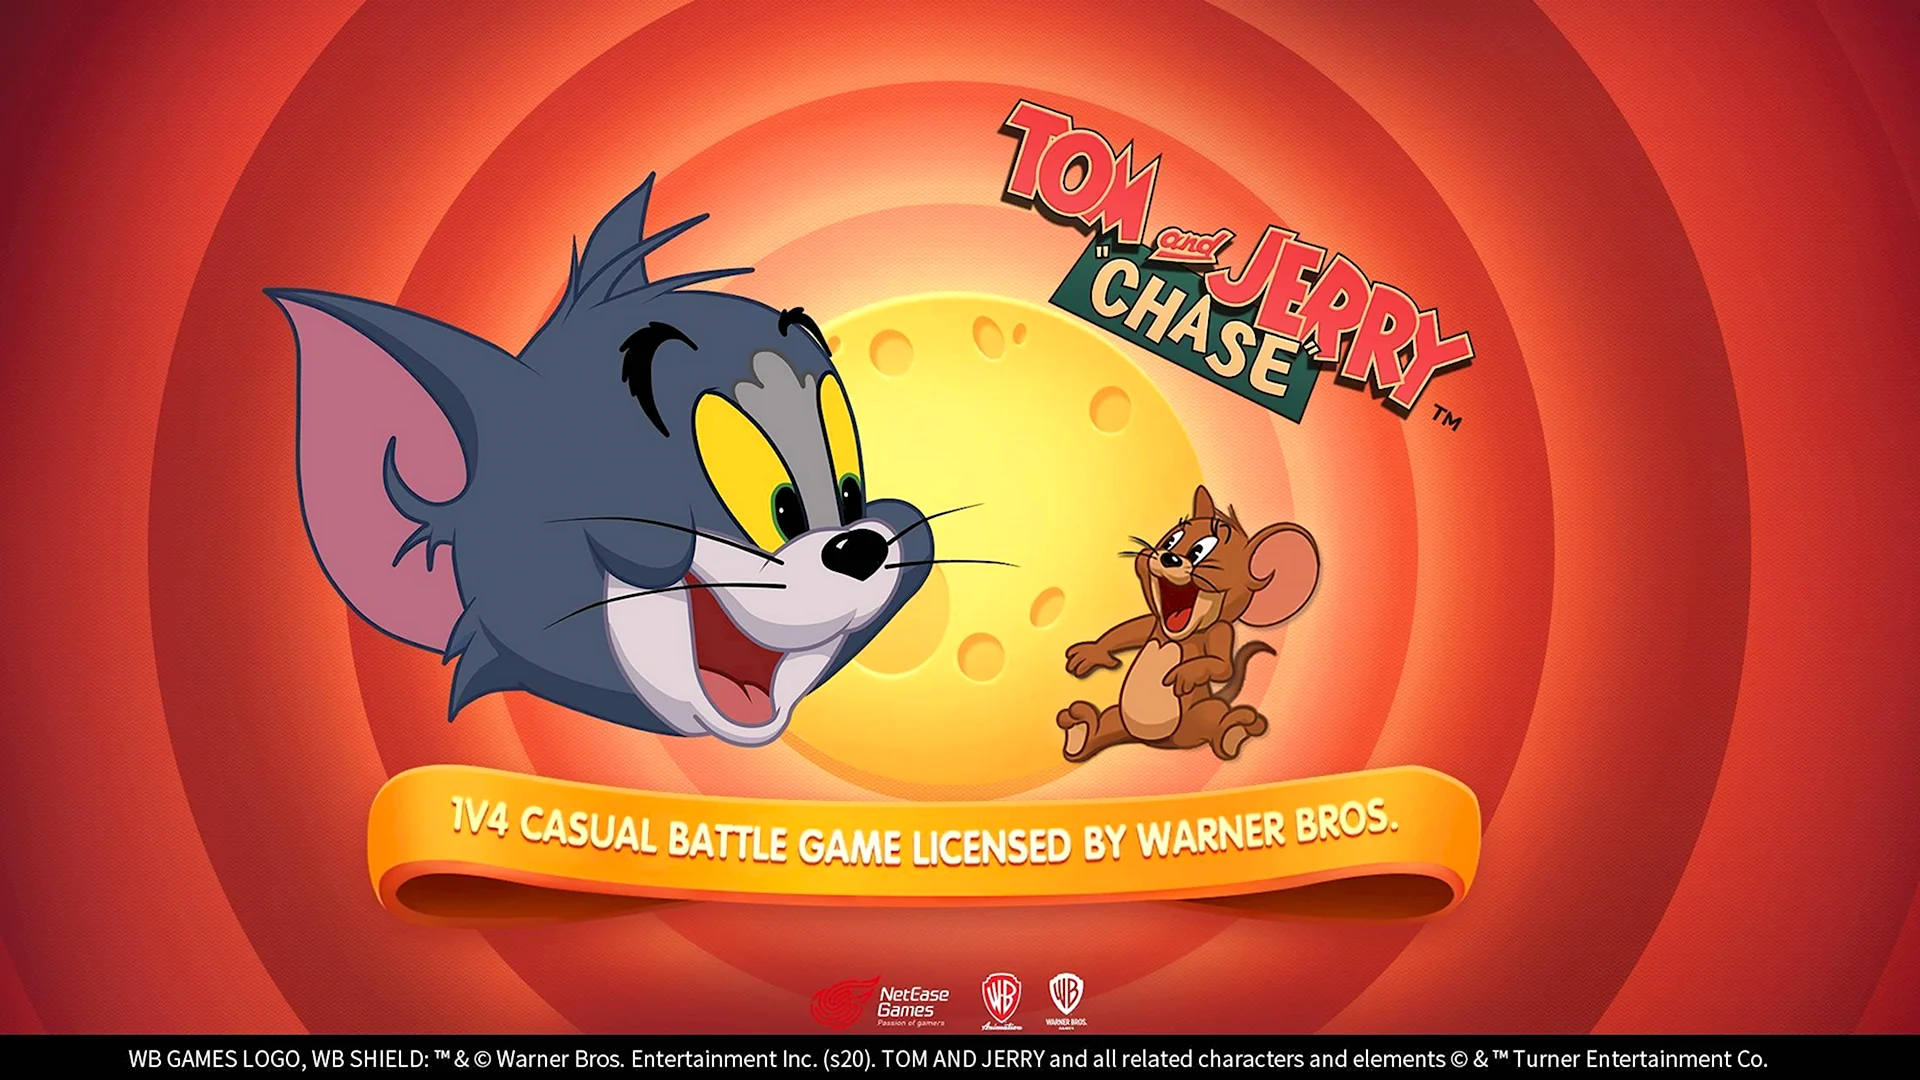 Игра Tom and Jerry Chase